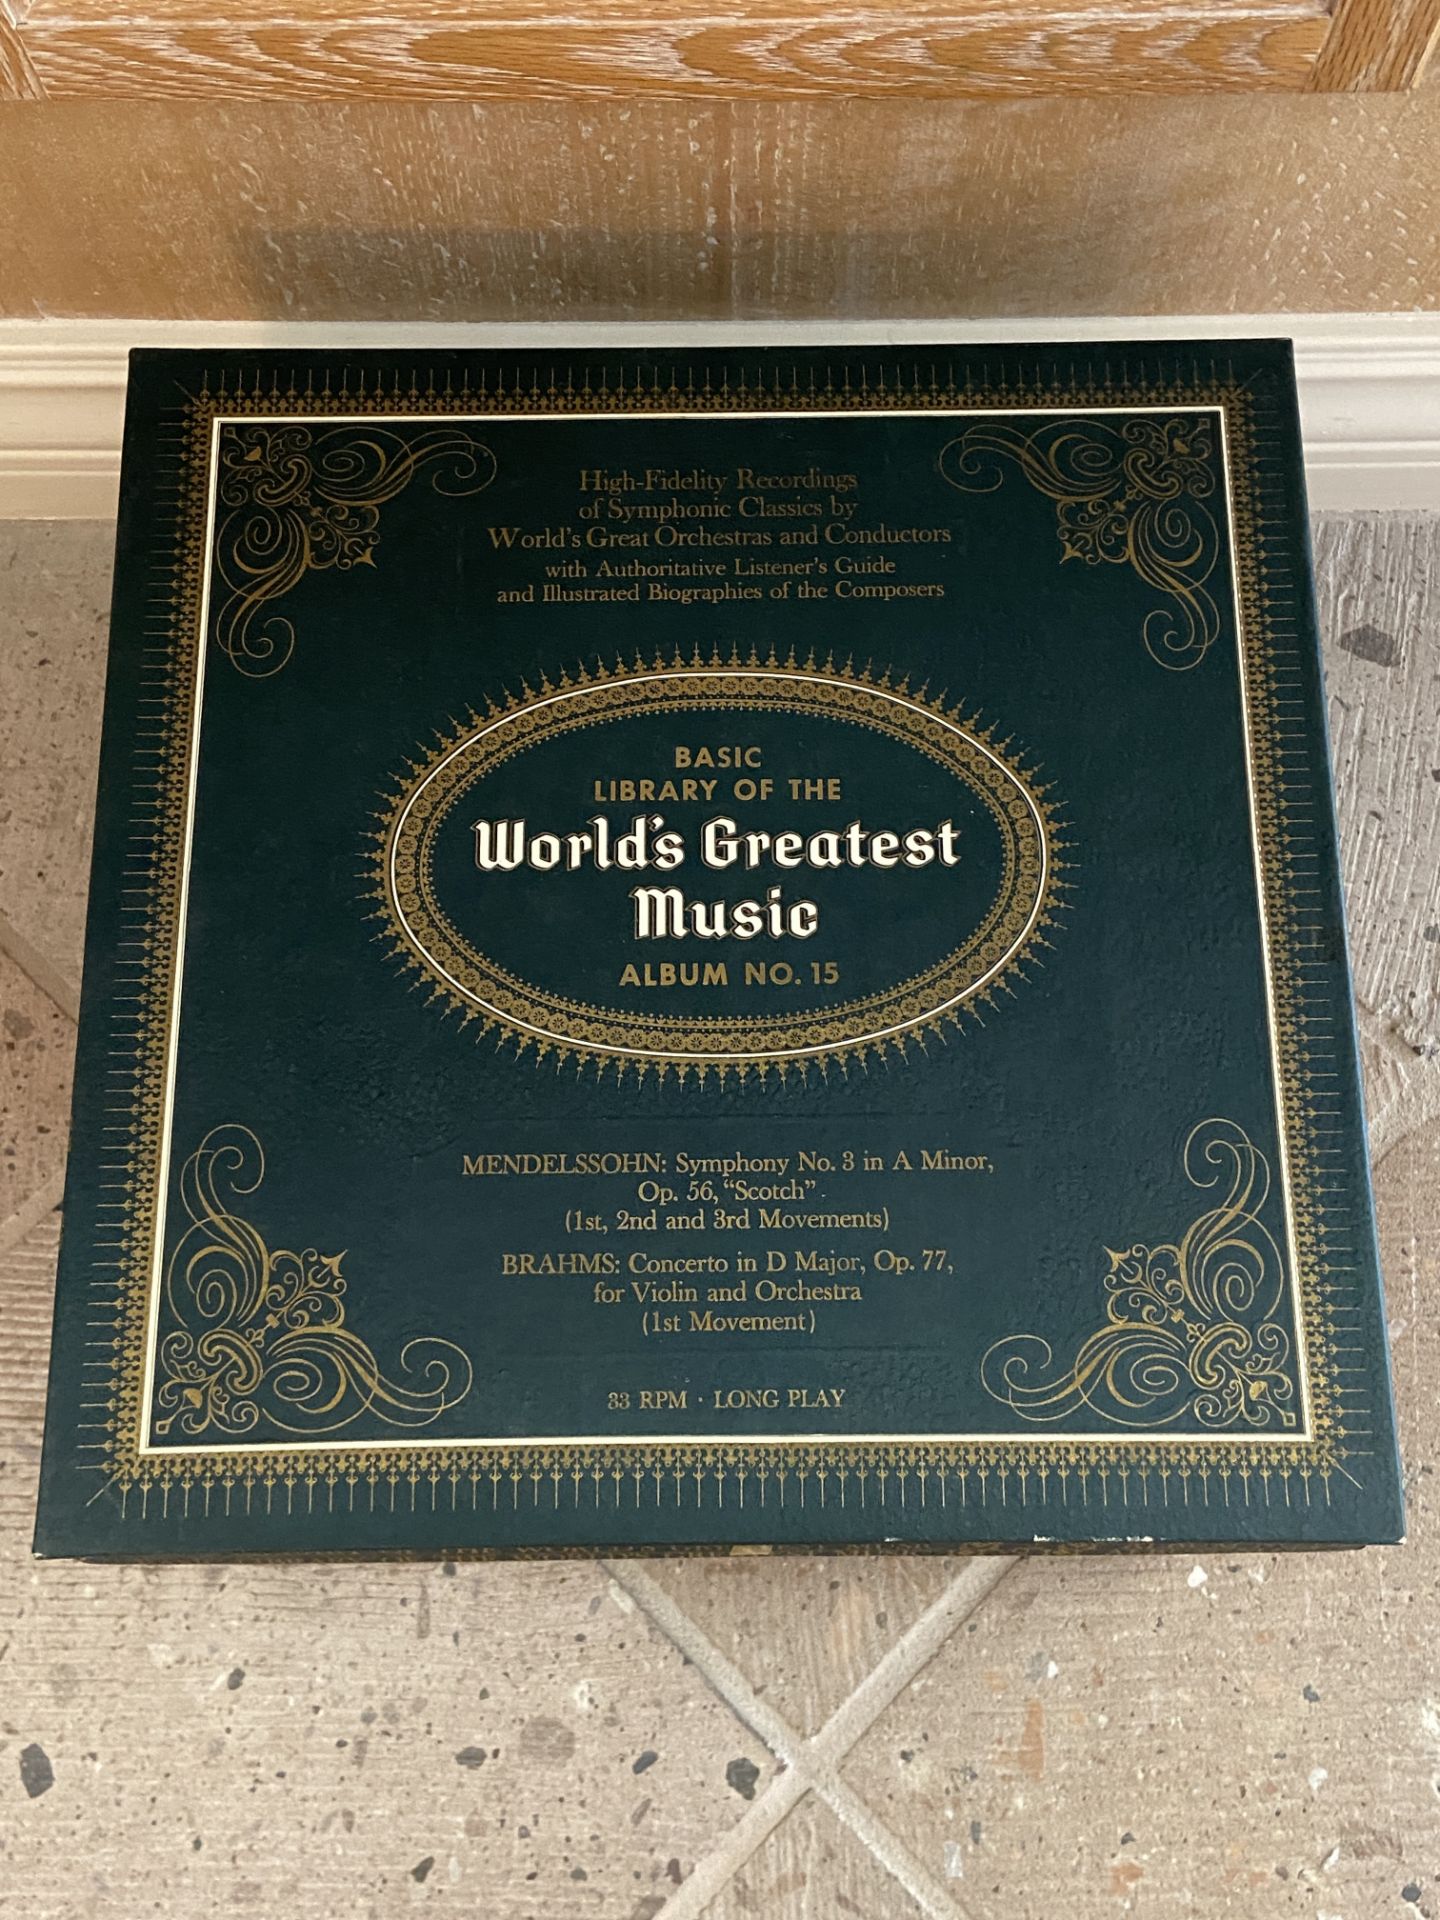 Set of 15 'Basic Library of the World's Greatest Music Albums' (Series 1-15) - Image 5 of 5